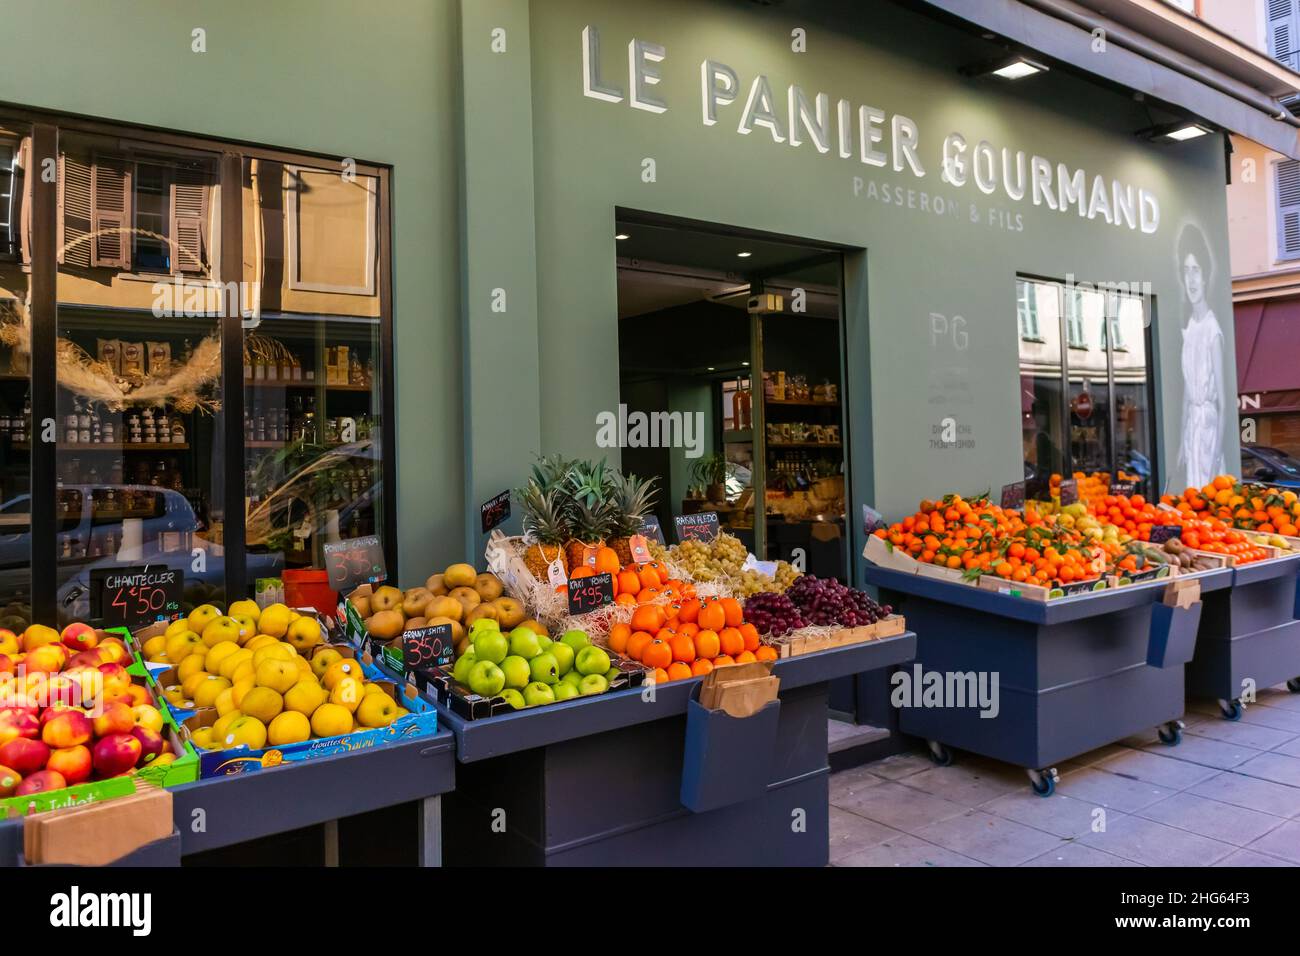 Nice, France, French Small Business, Shops Fronts in Old CIty Center,  Fruits and Vegetables, "Le Panier Gourmand" Green Grocer Stock Photo - Alamy